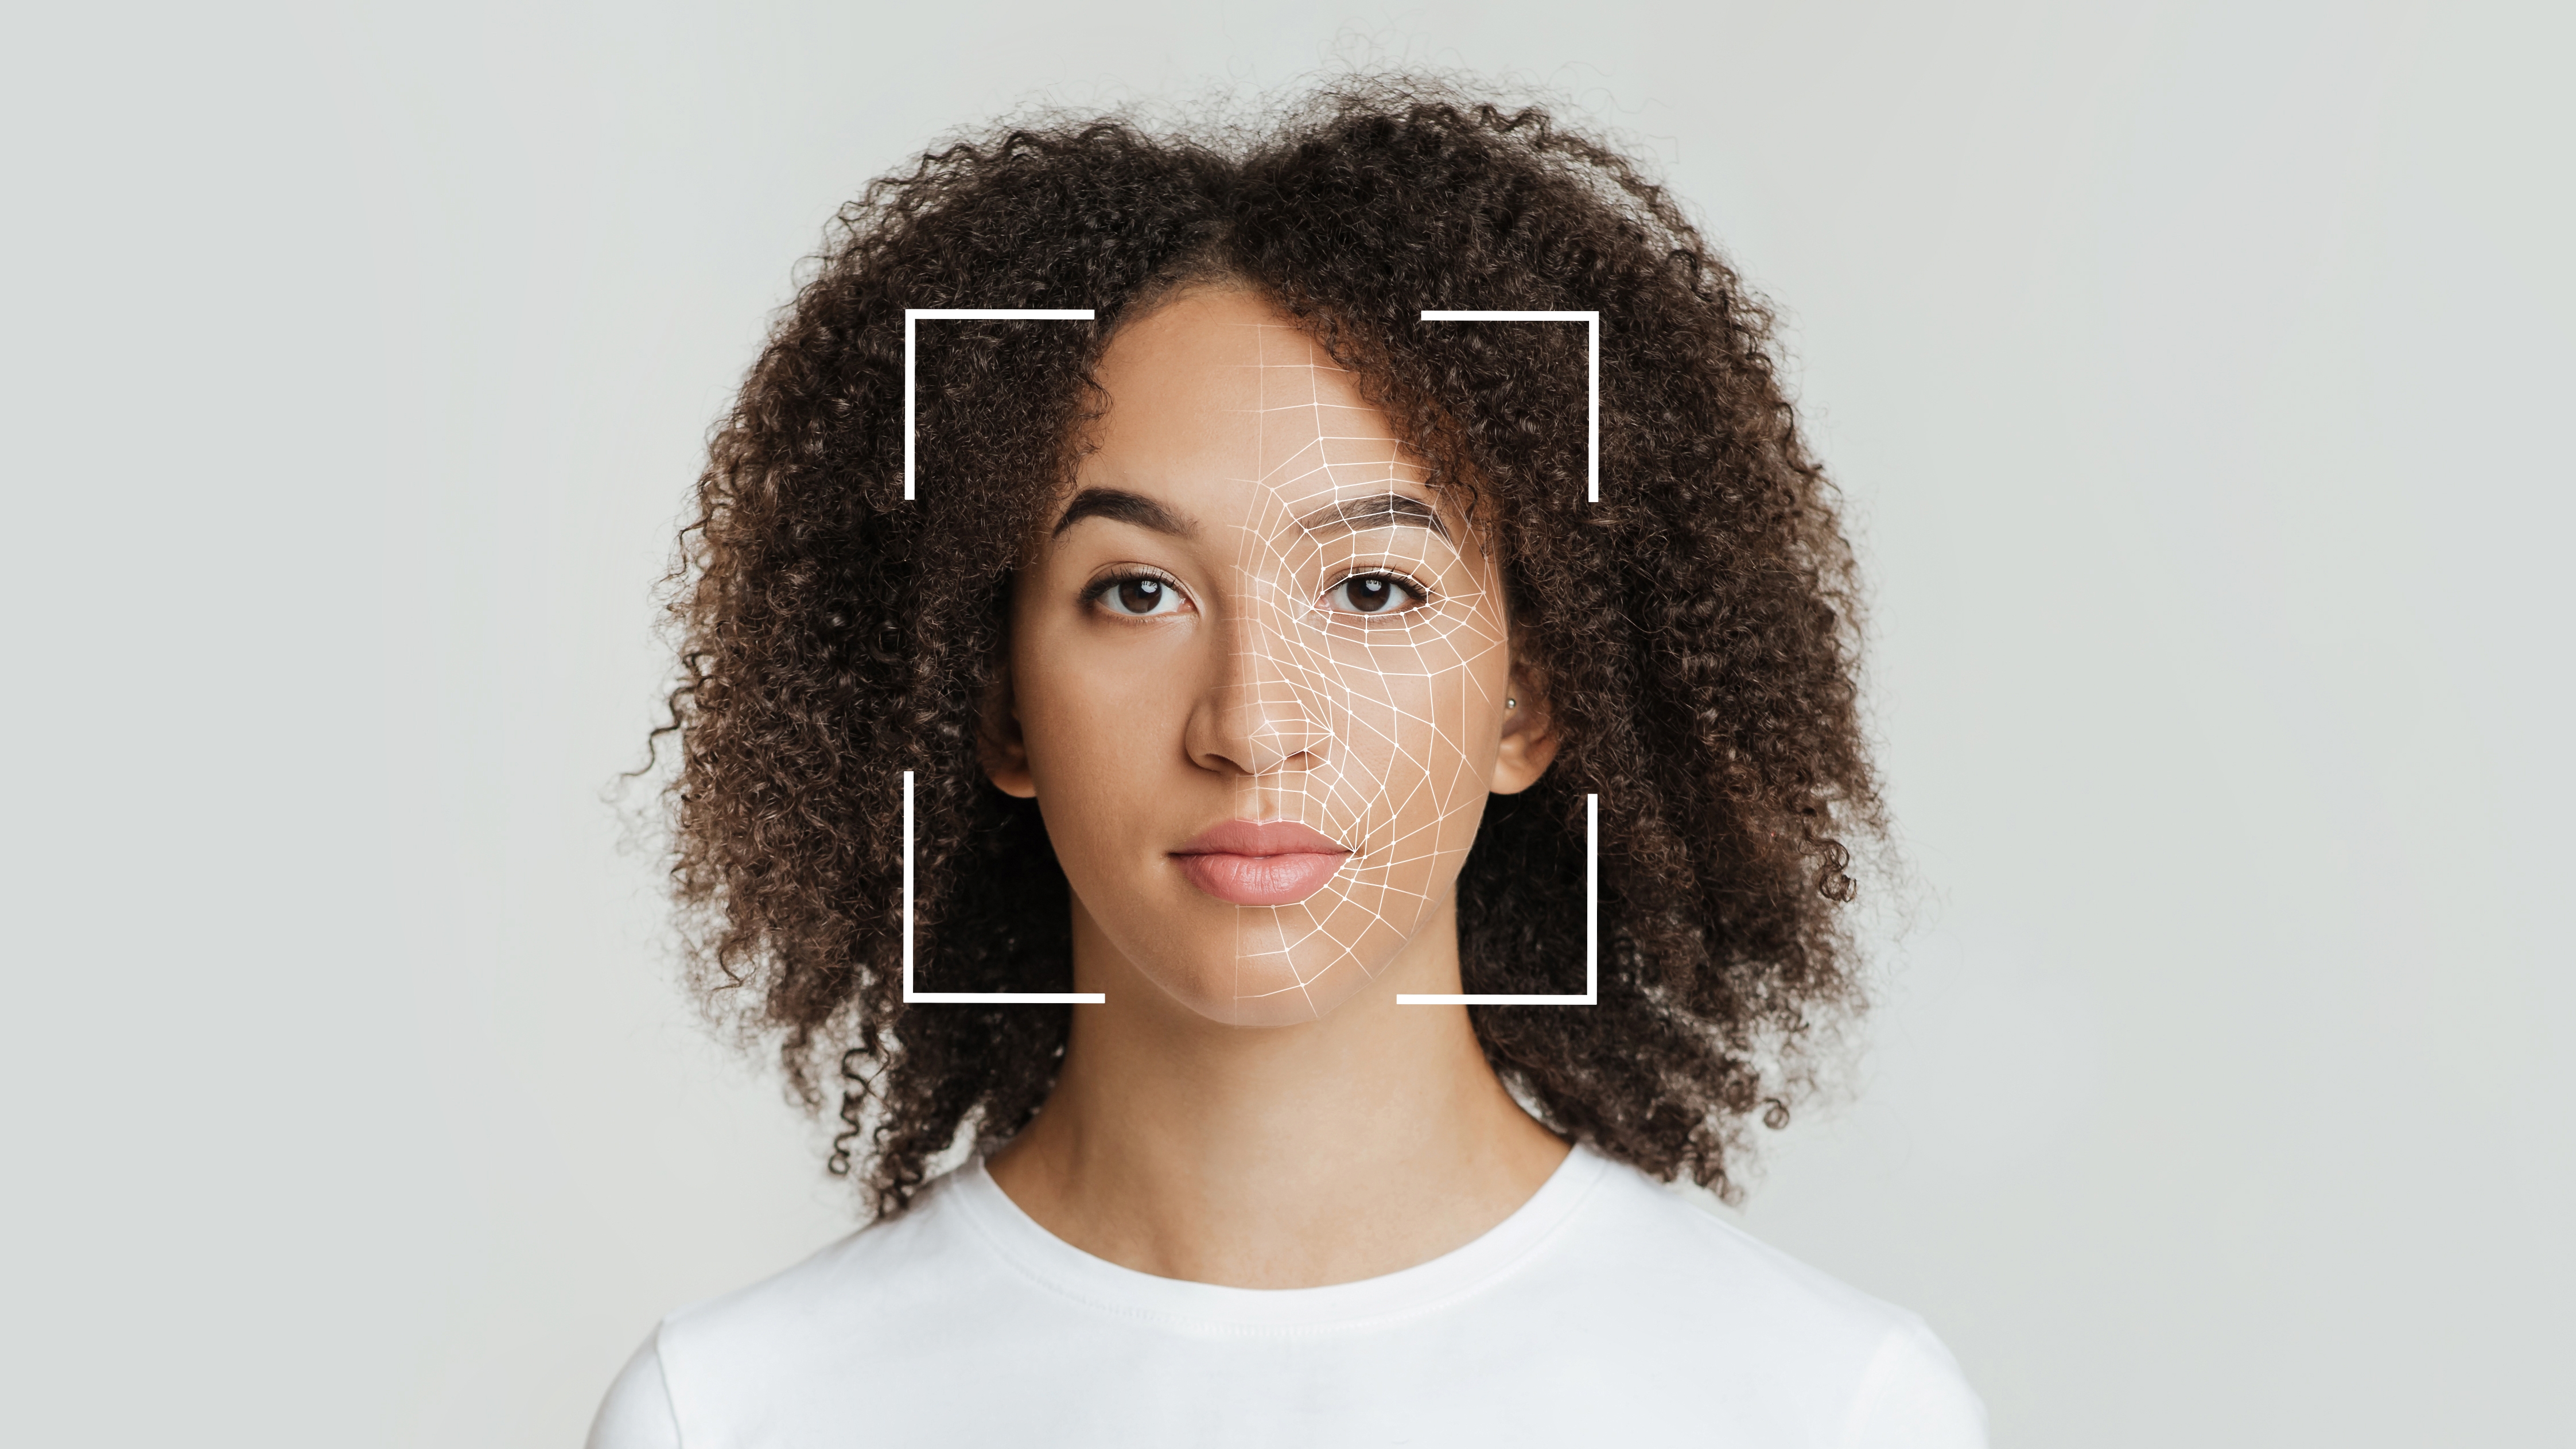 shutterstock 2057011499 1 Rite Aids Facial Recognition Profiled Shoppers Profiled By As Potential Thieves, So FTC Shuts It Down